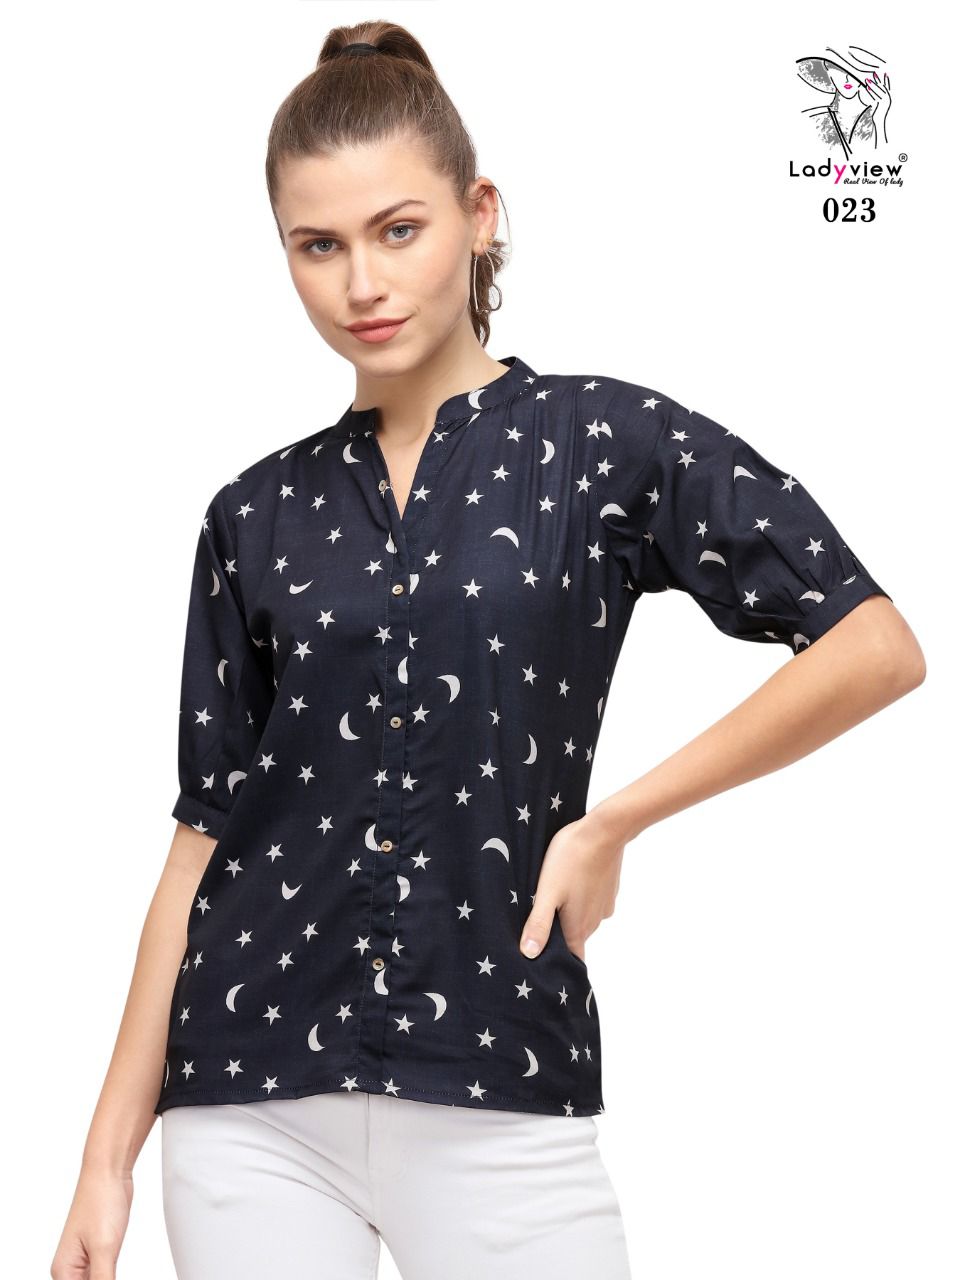 ladyview topsy remix 2 crape new and modern style top catalog